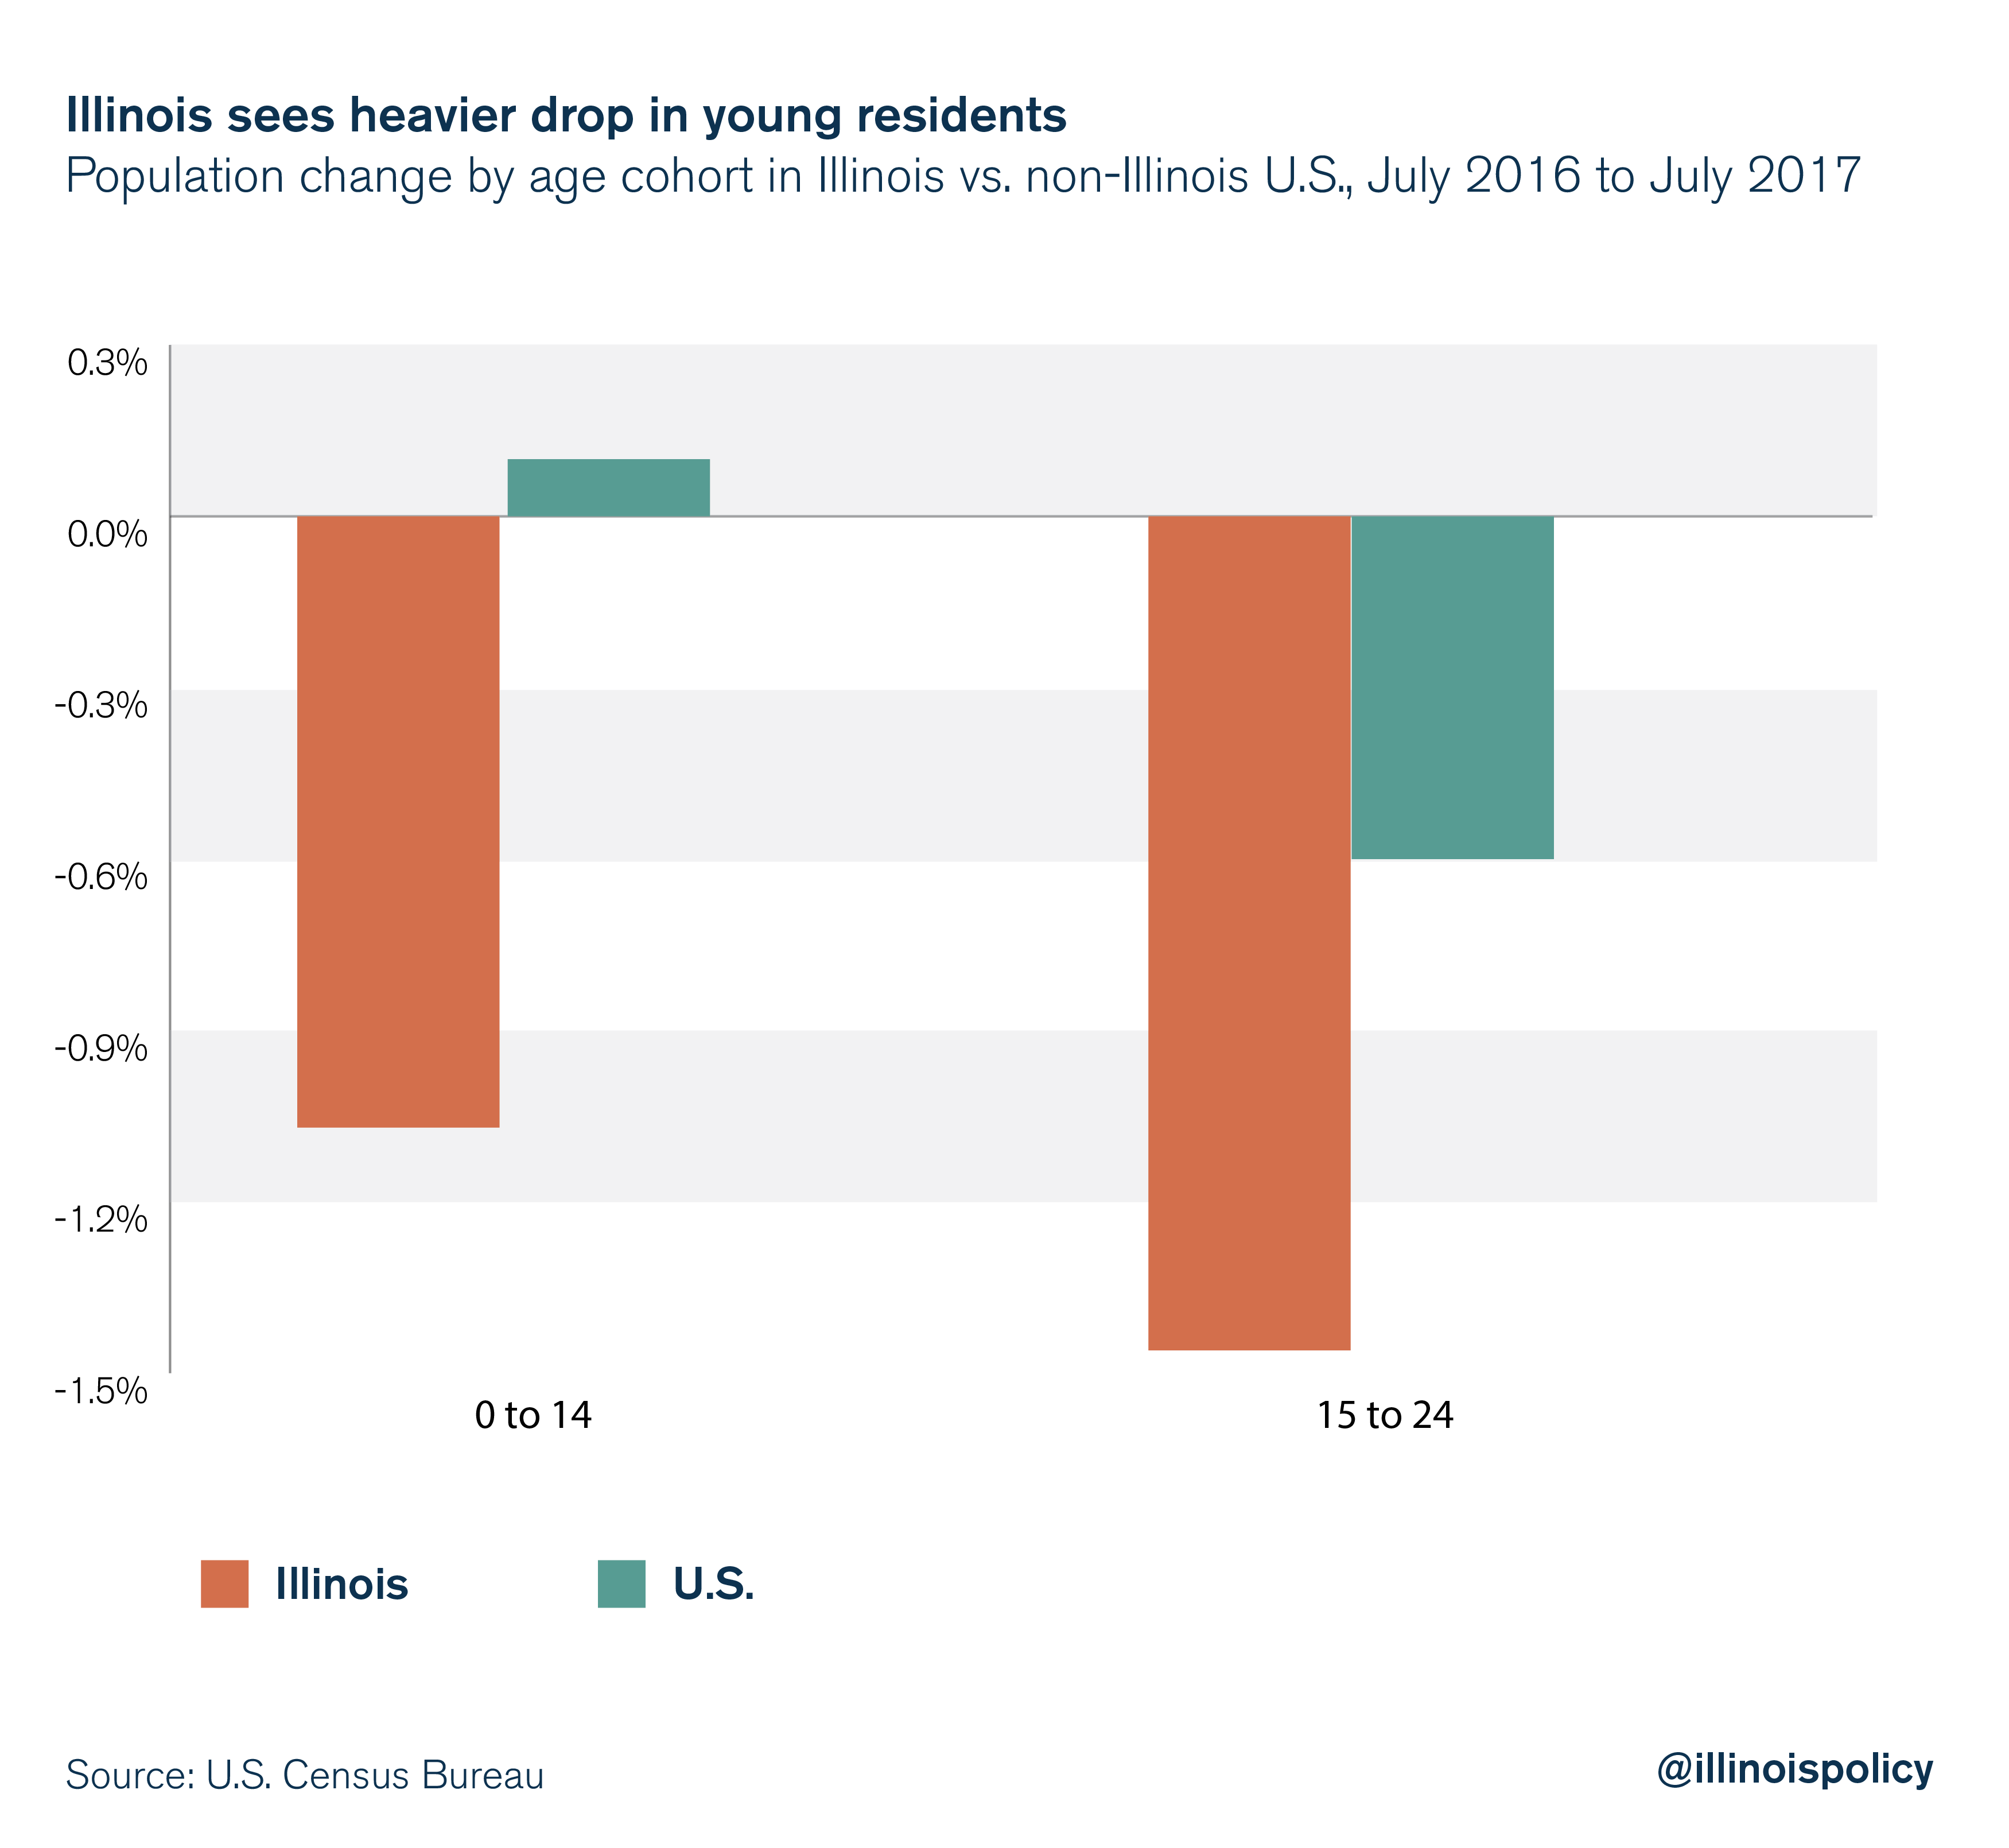 Illinois sees heavier drop in young residents